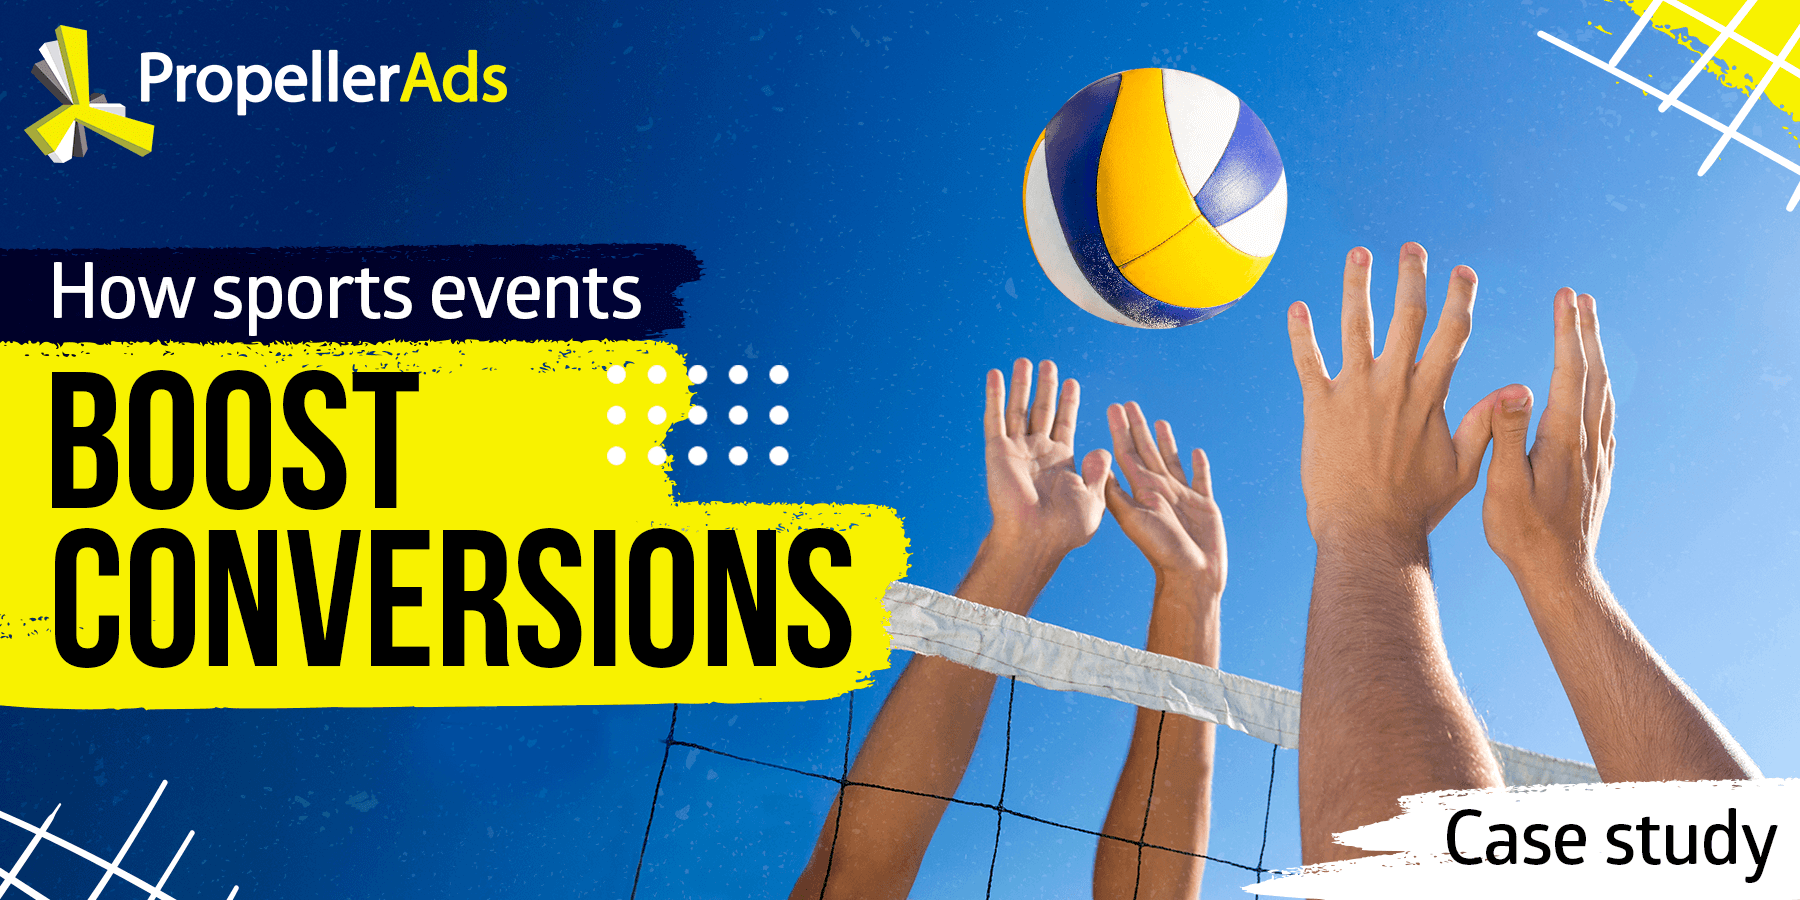 propellerads sports events boost conversions image